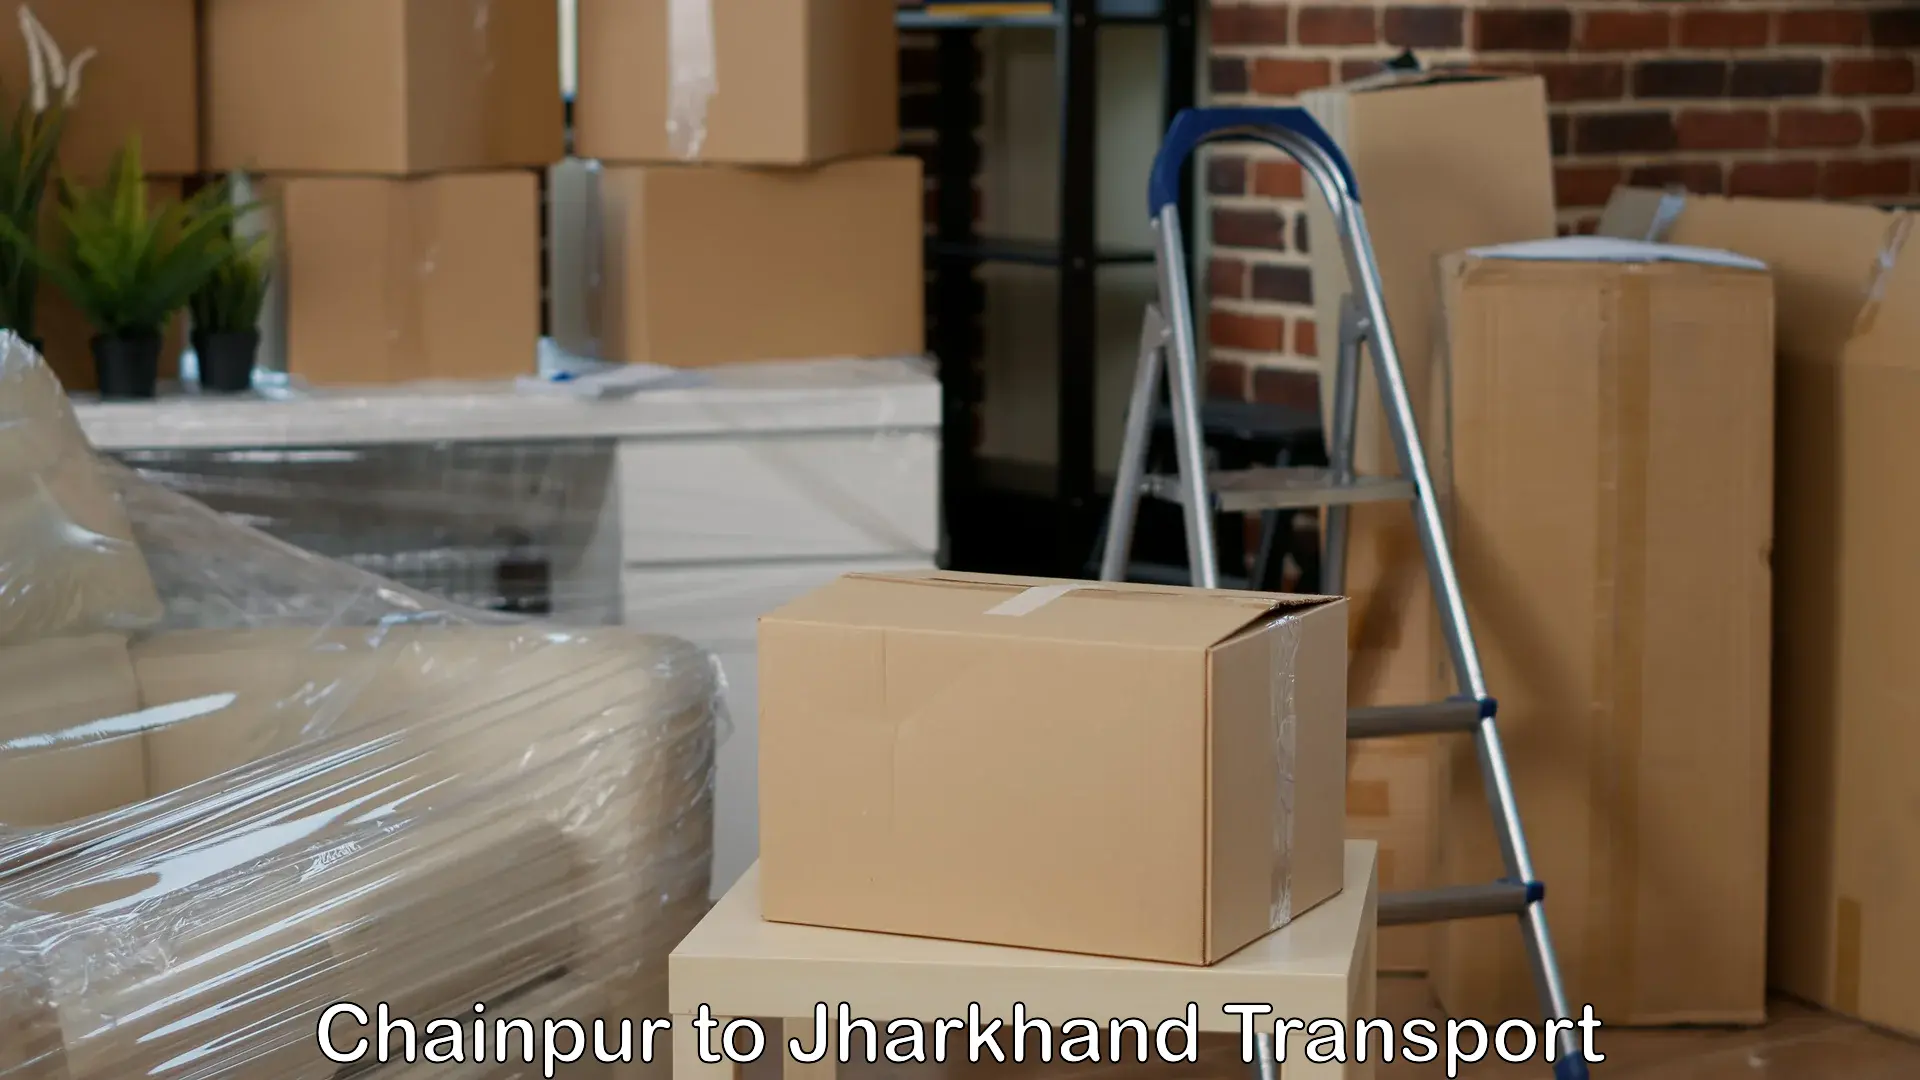 Truck transport companies in India in Chainpur to Manoharpur